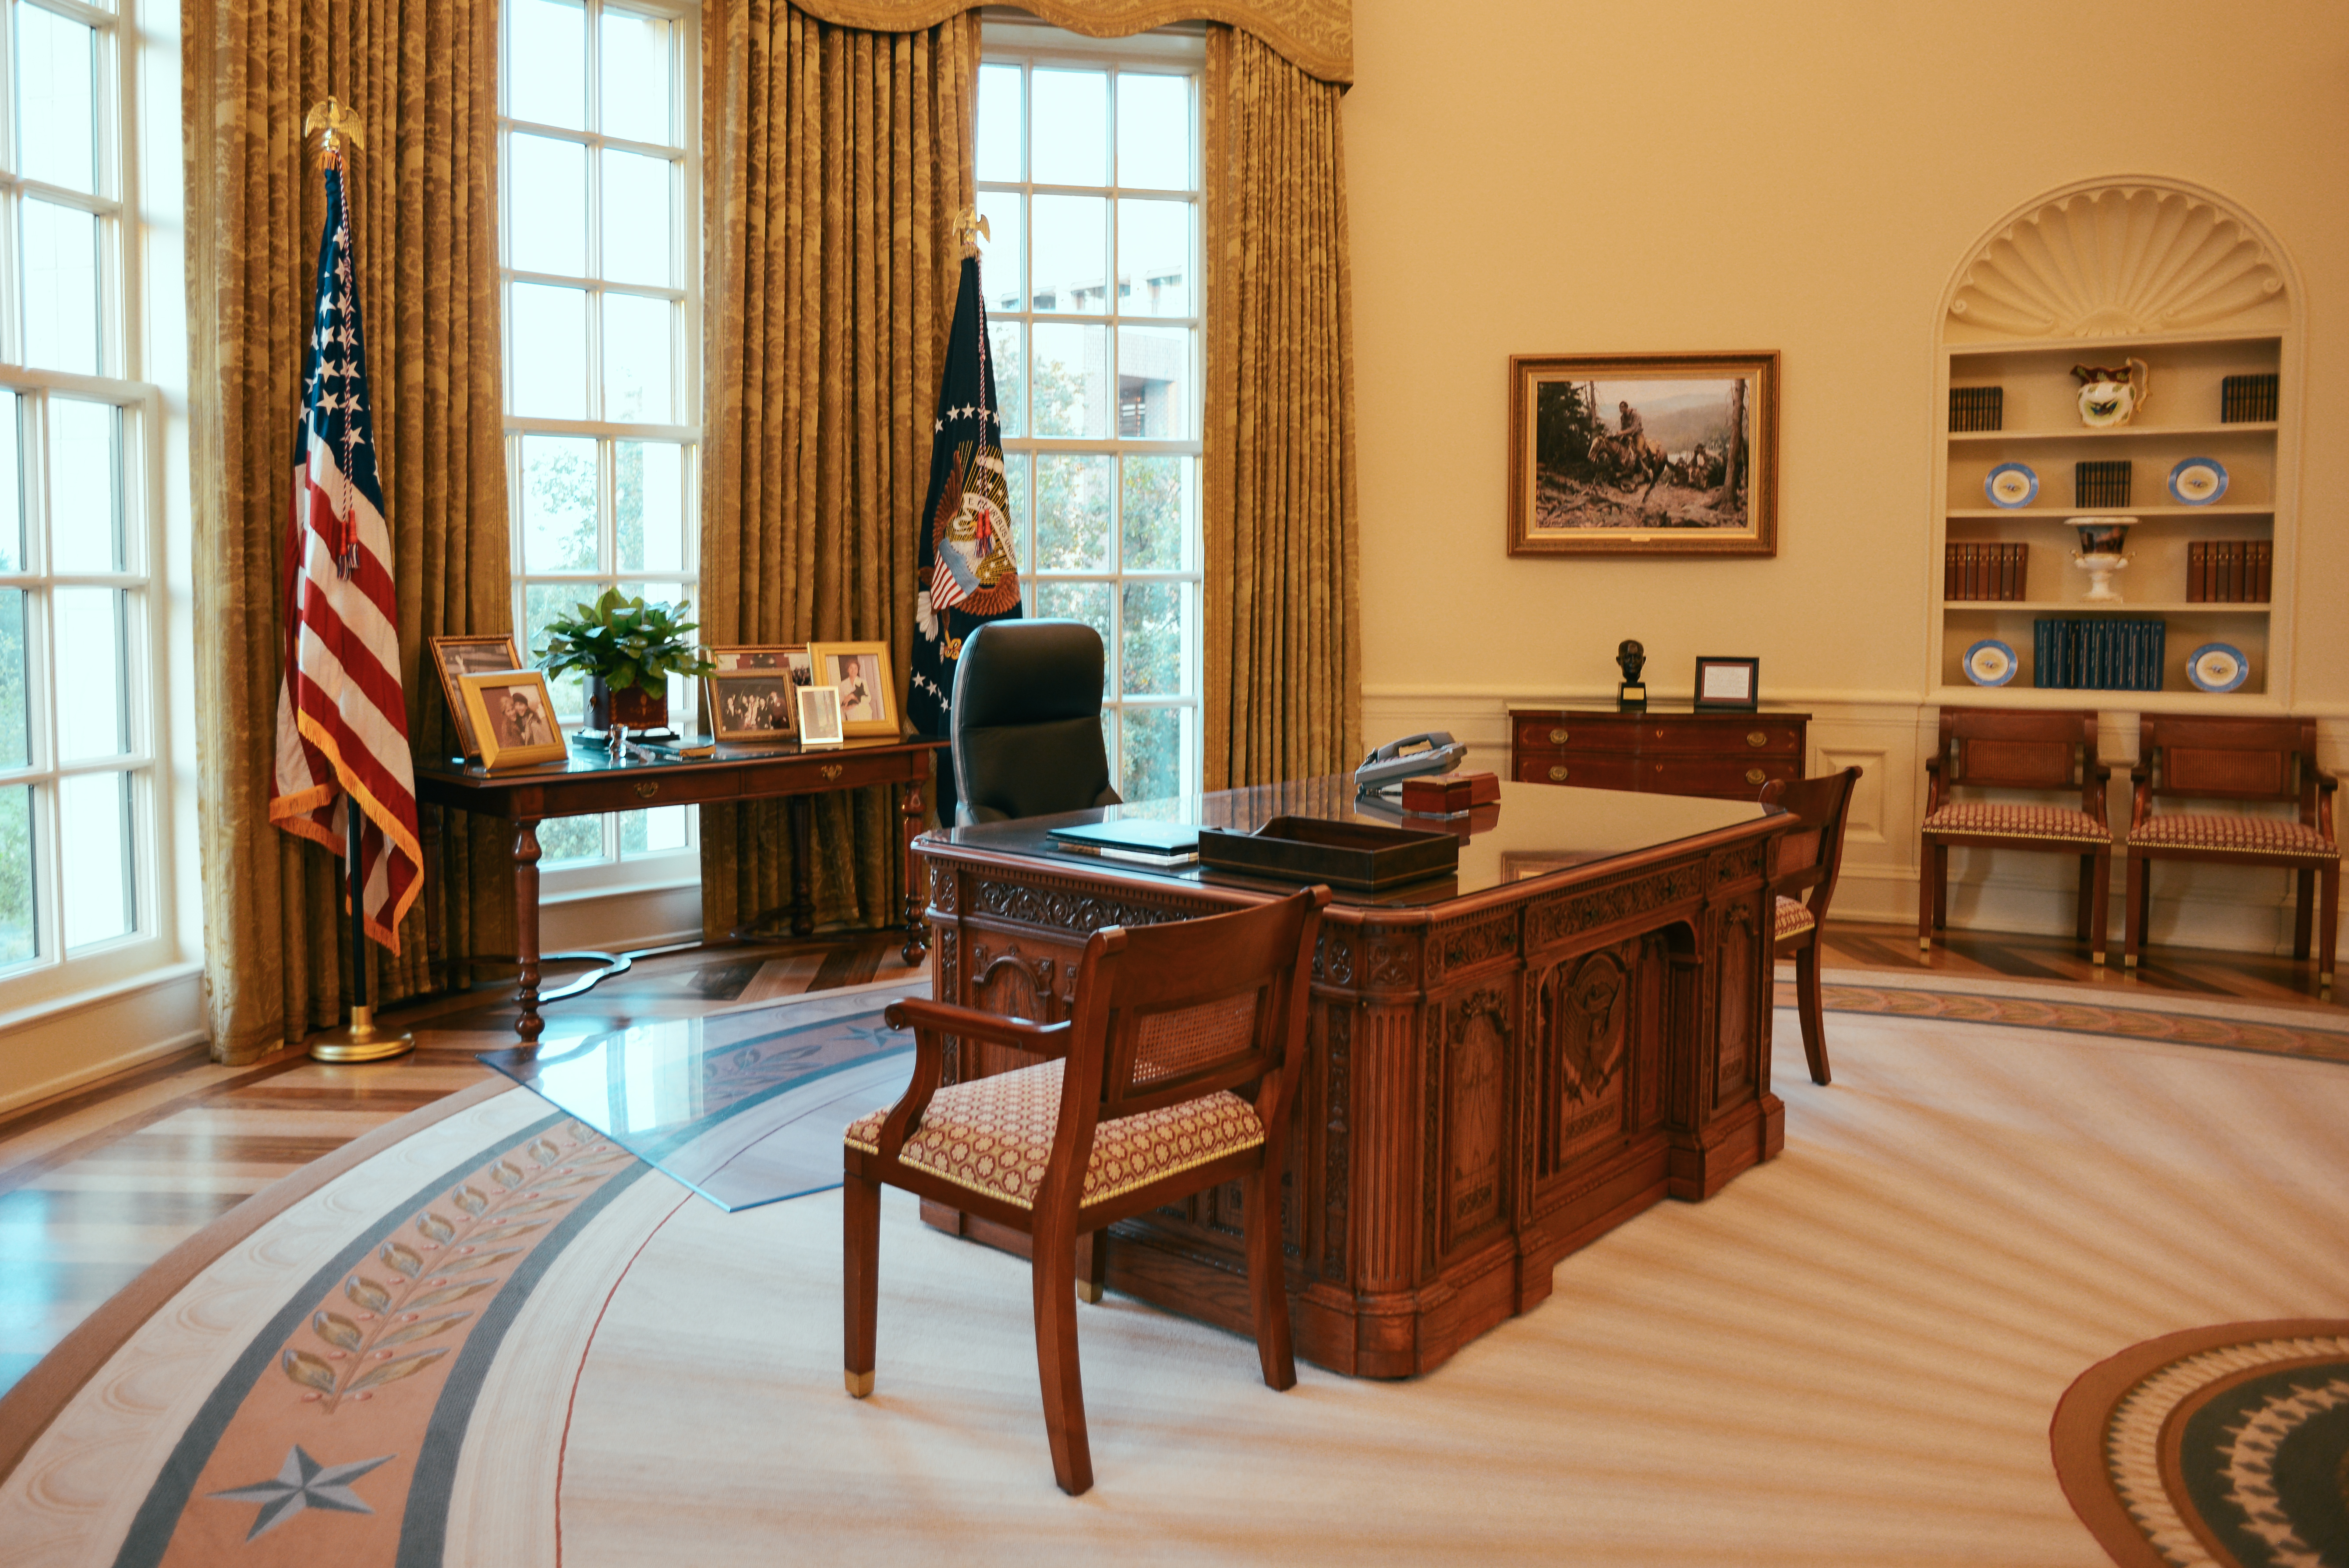 A second view of the full-size replica of the President's Oval Office, horizontal (landscape) view